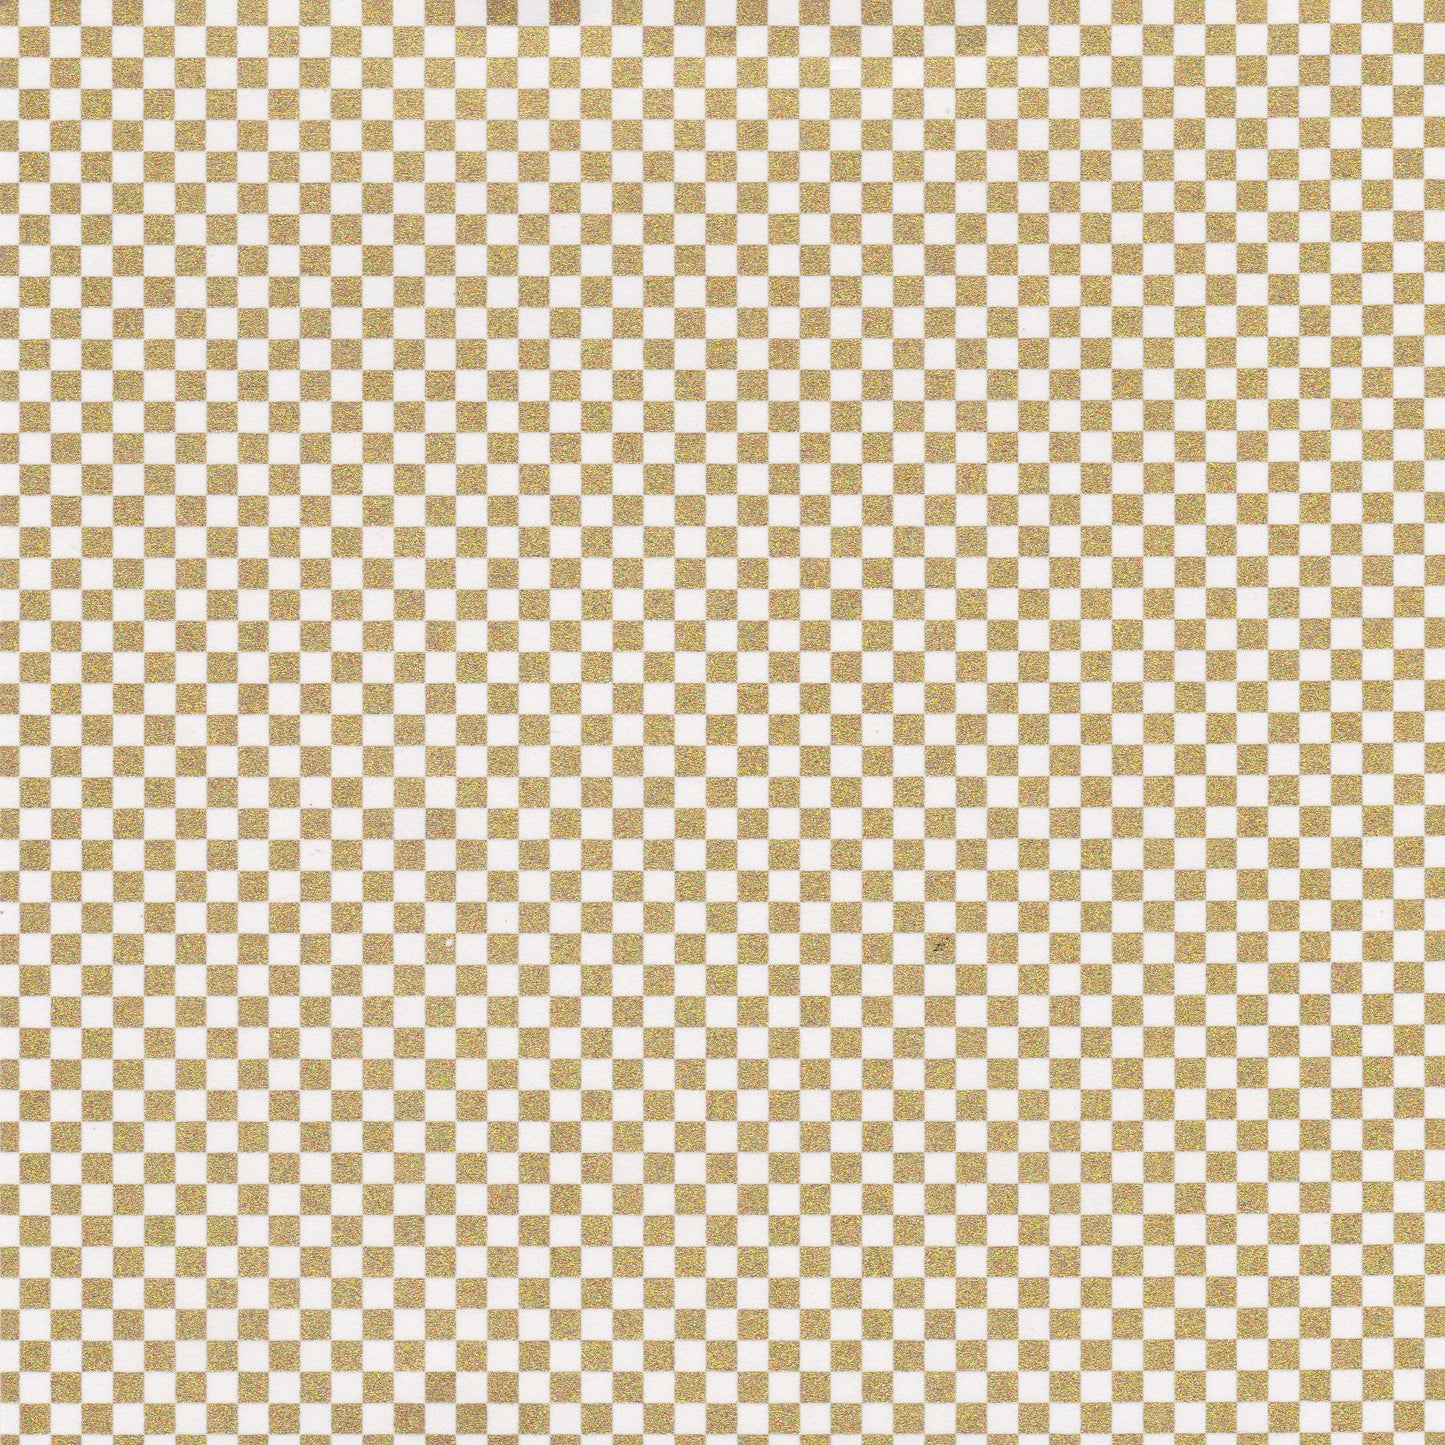 Pack of 20 Sheets 14x14cm Yuzen Washi Origami Paper HZ-051 - Gold Checkerboard (S) - washi paper - Lavender Home London